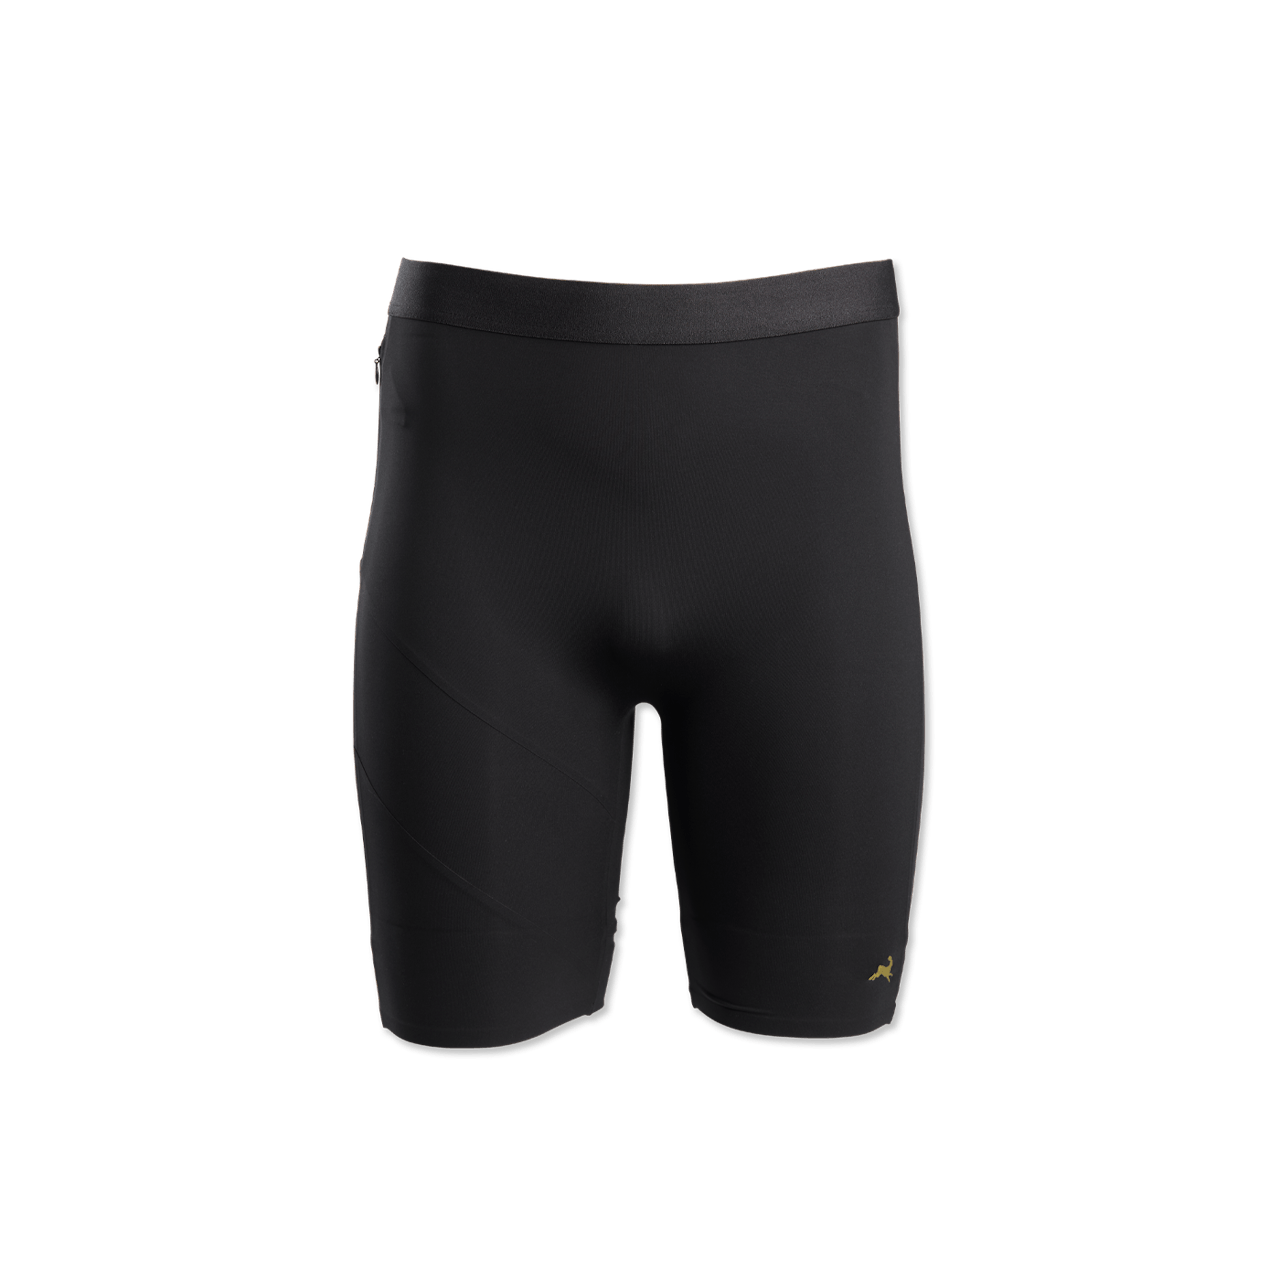 https://tracksmith-media.imgix.net/Spring20-Mens-Allston-Half-Tight-Black-On-Model_f0e39f43-9d01-492a-924c-7db7961845a1.png?auto=format,compress&crop=faces&dpr=2&fit=crop&h=640&w=640